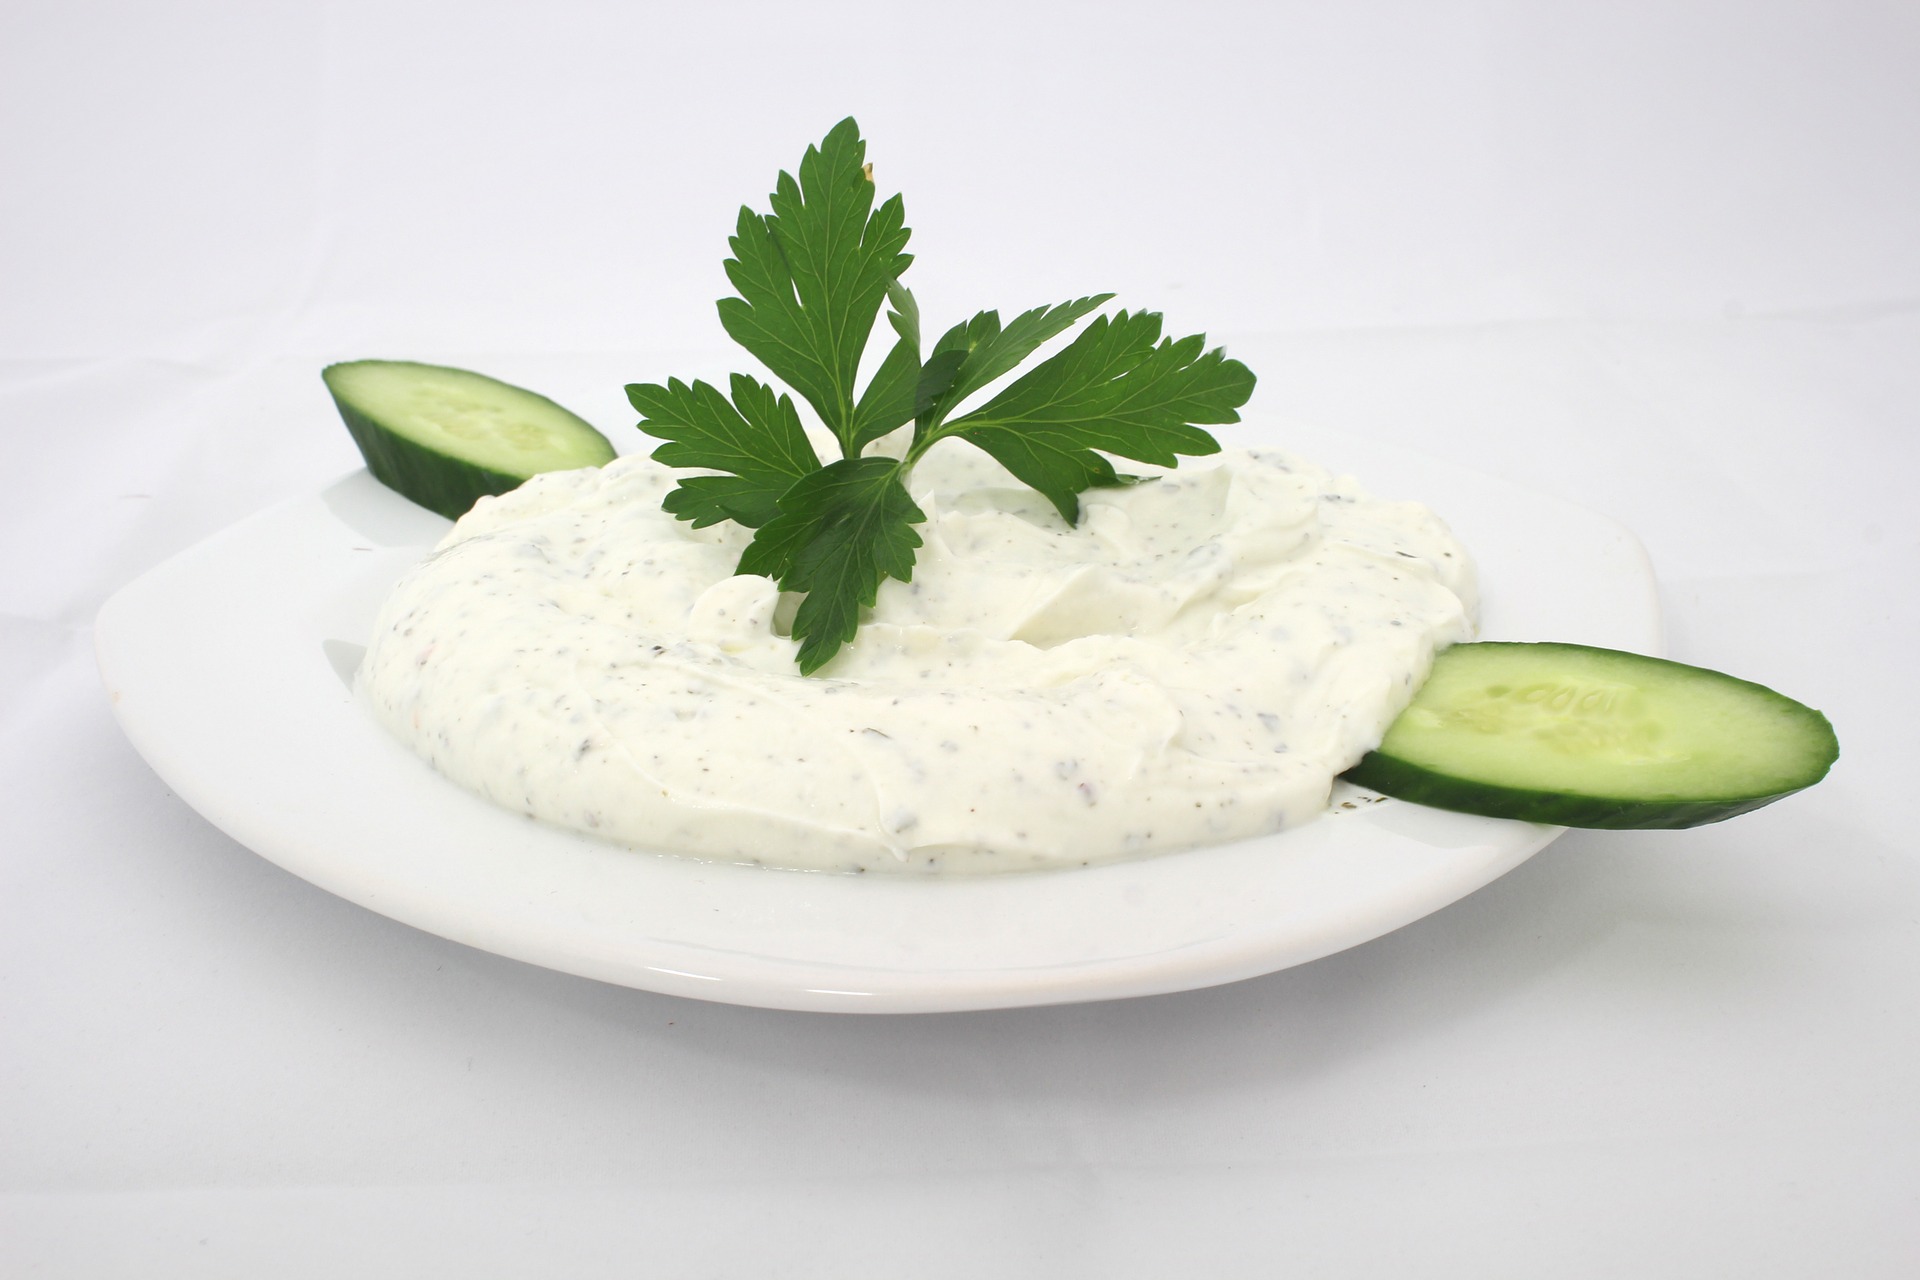 FIND OUT MORE ABOUT TZATZIKI SEASONING